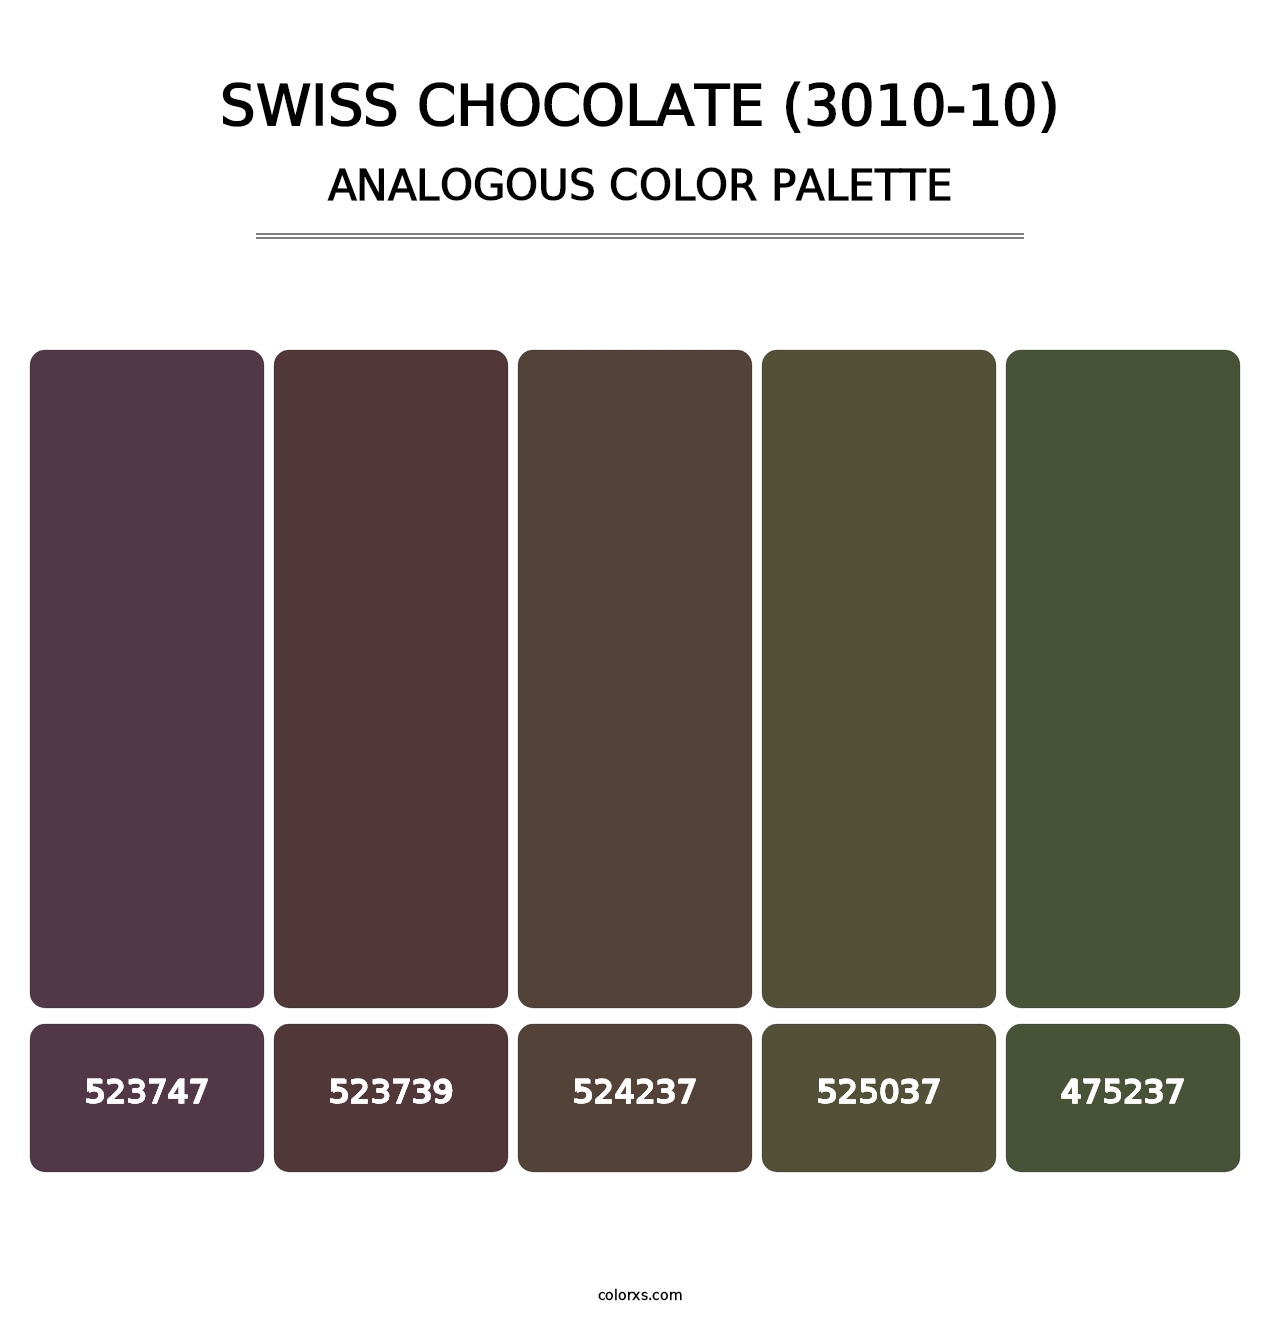 Swiss Chocolate (3010-10) - Analogous Color Palette